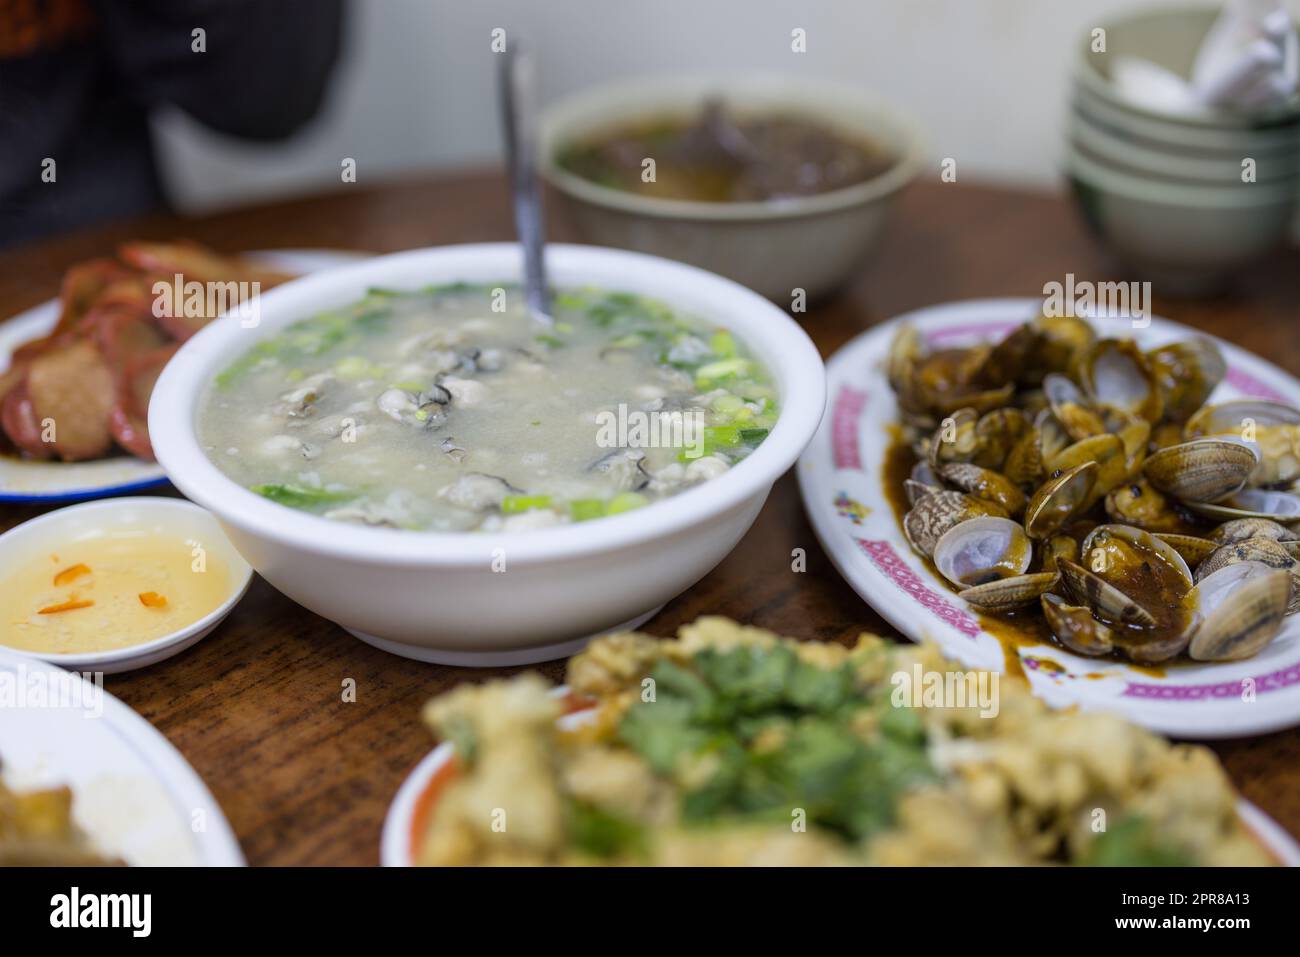 Chaozhou cuisine oyster congee and fry clam Stock Photo